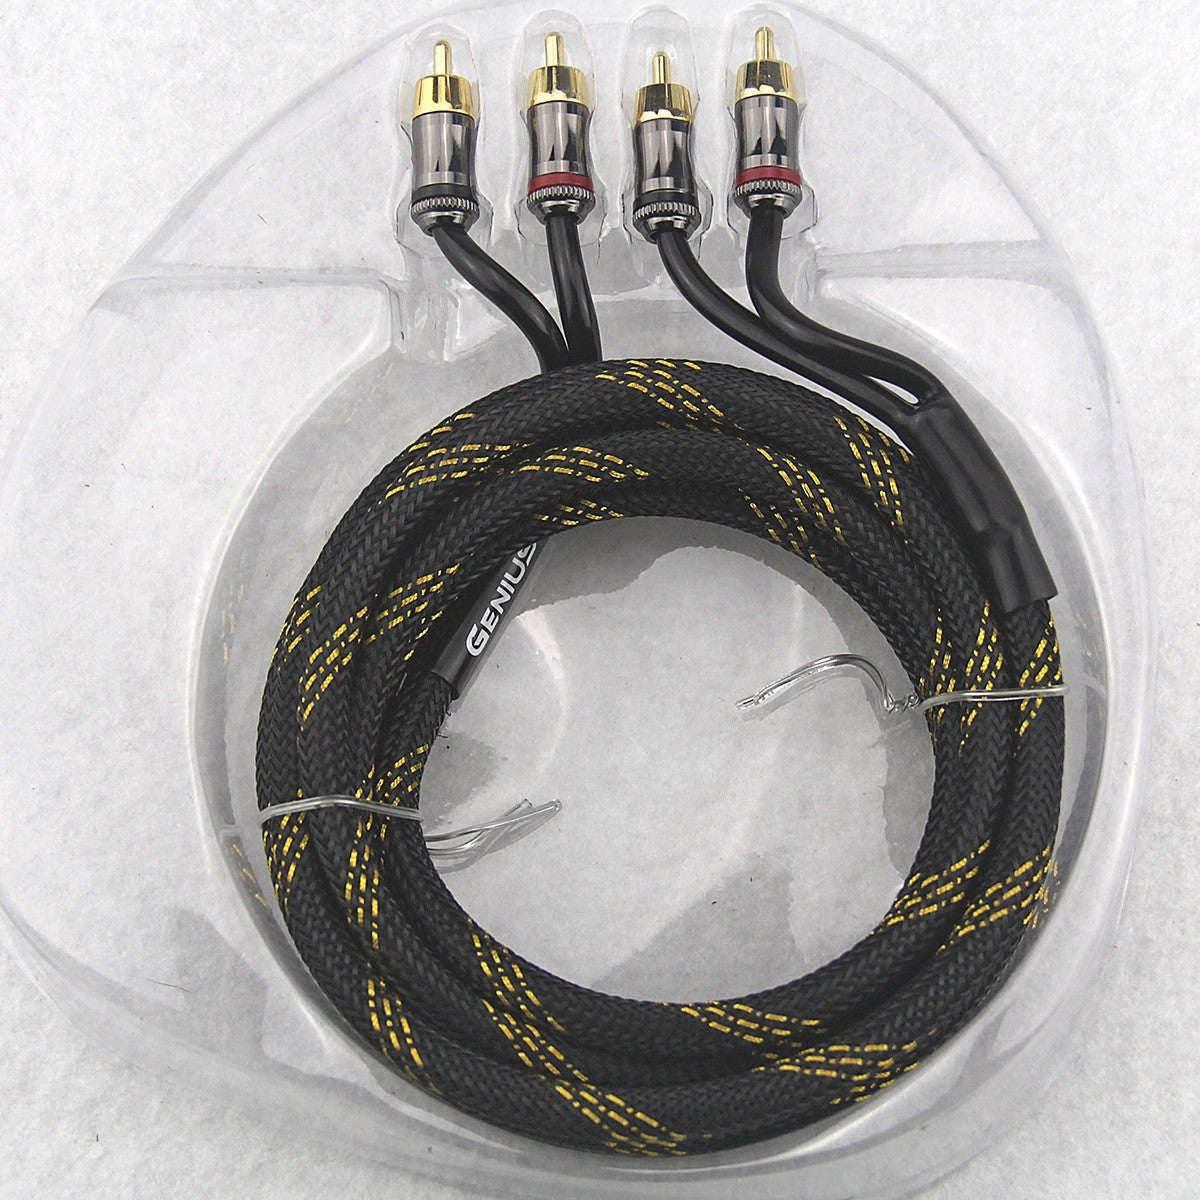 Cable RCA 1,5m – Proyecto 101